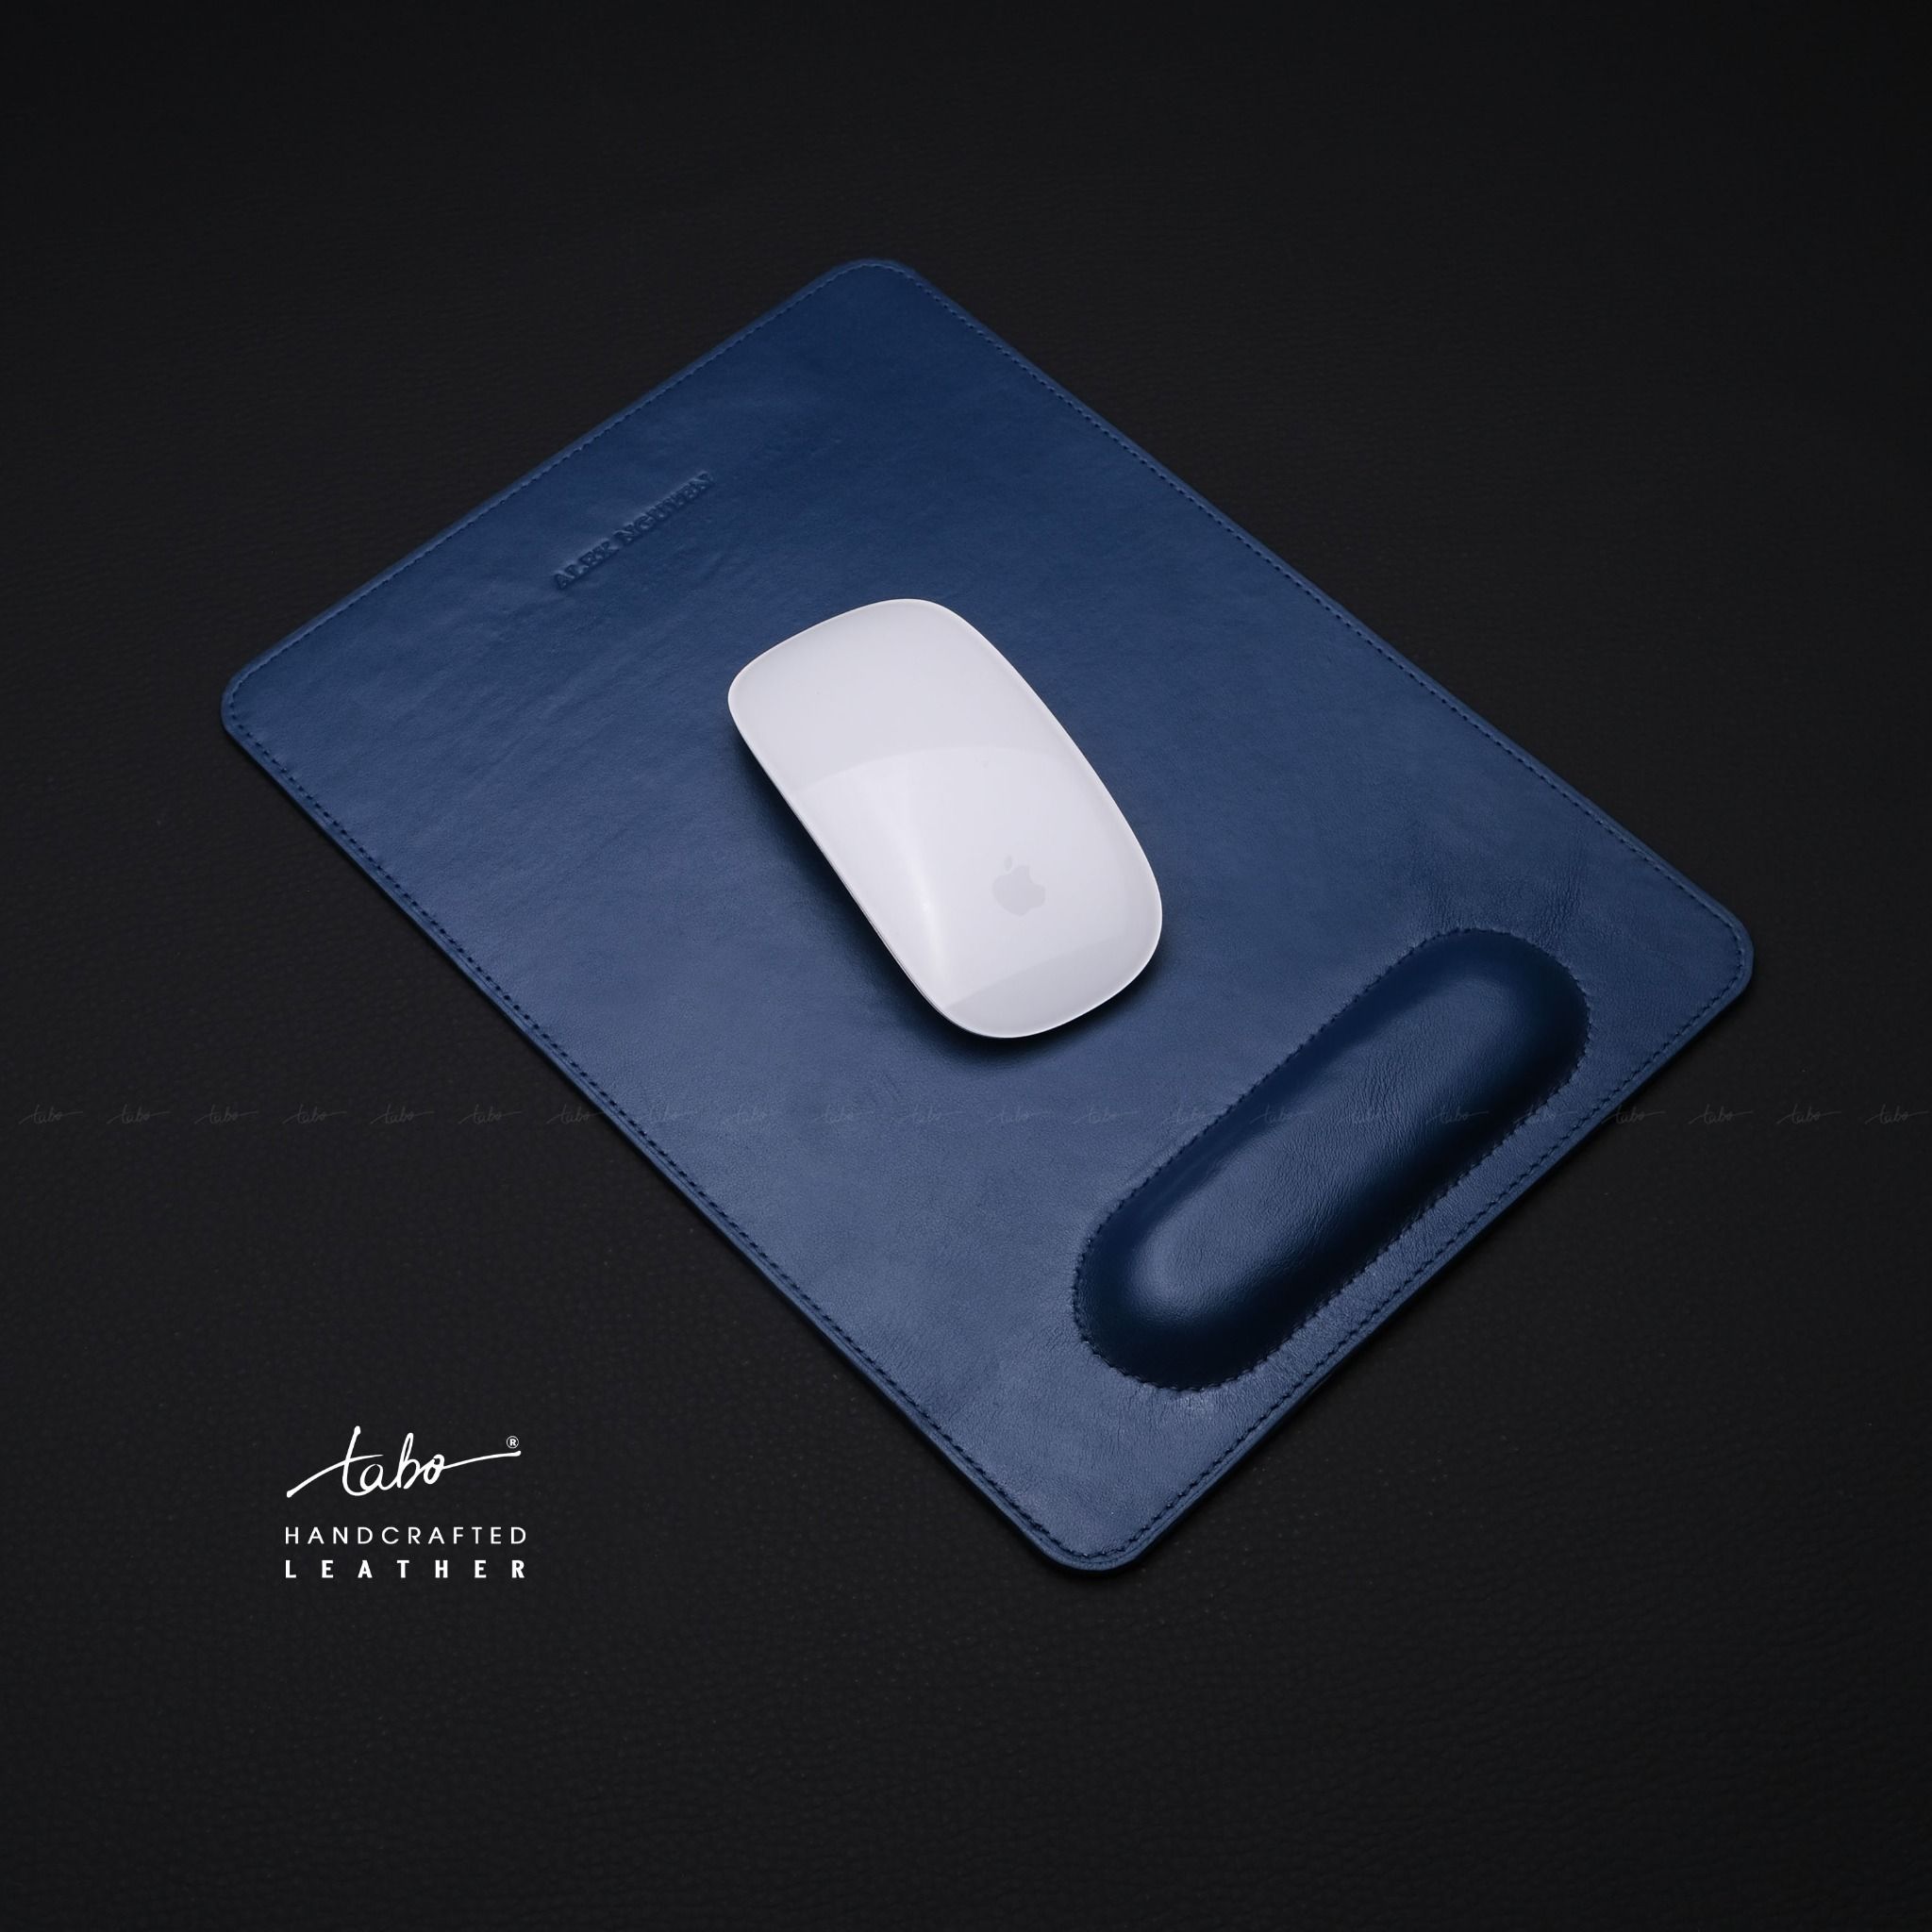  LEATHER MOUSE PAD MS01 